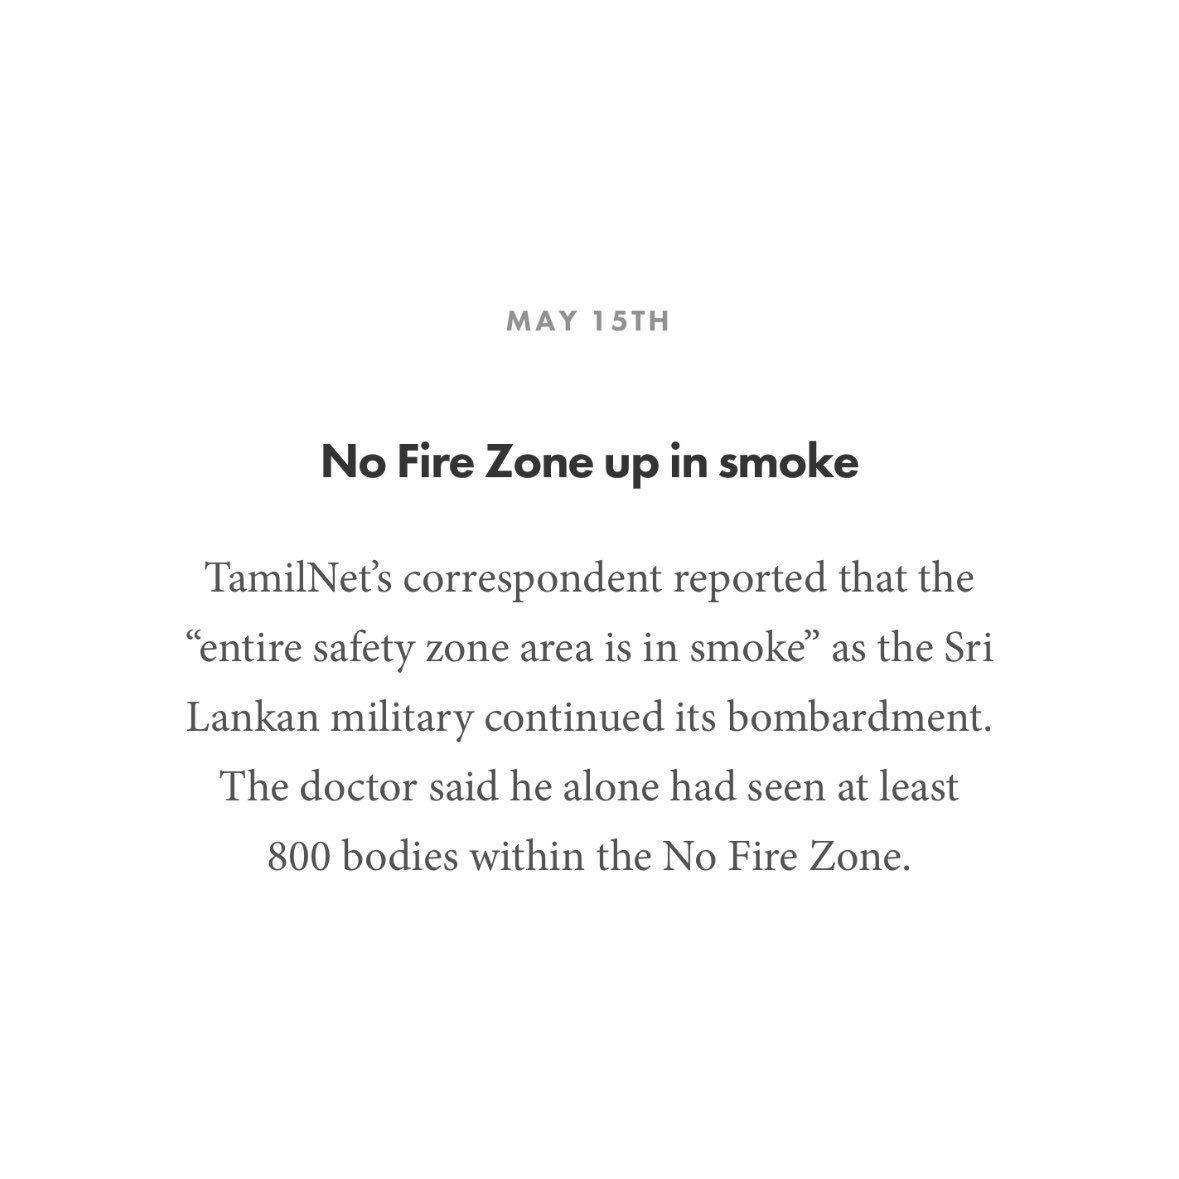 On this day 15 years ago, Sri Lanka lit the last remaining No Fire Zone entirely up ‘in smoke’.

Thousands are being slaughtered.

Never forget.

_____

Read more at remembermay2009.com

#nofirezone #tamil #eelam #lka #srilanka #genocide #tamilgenocide